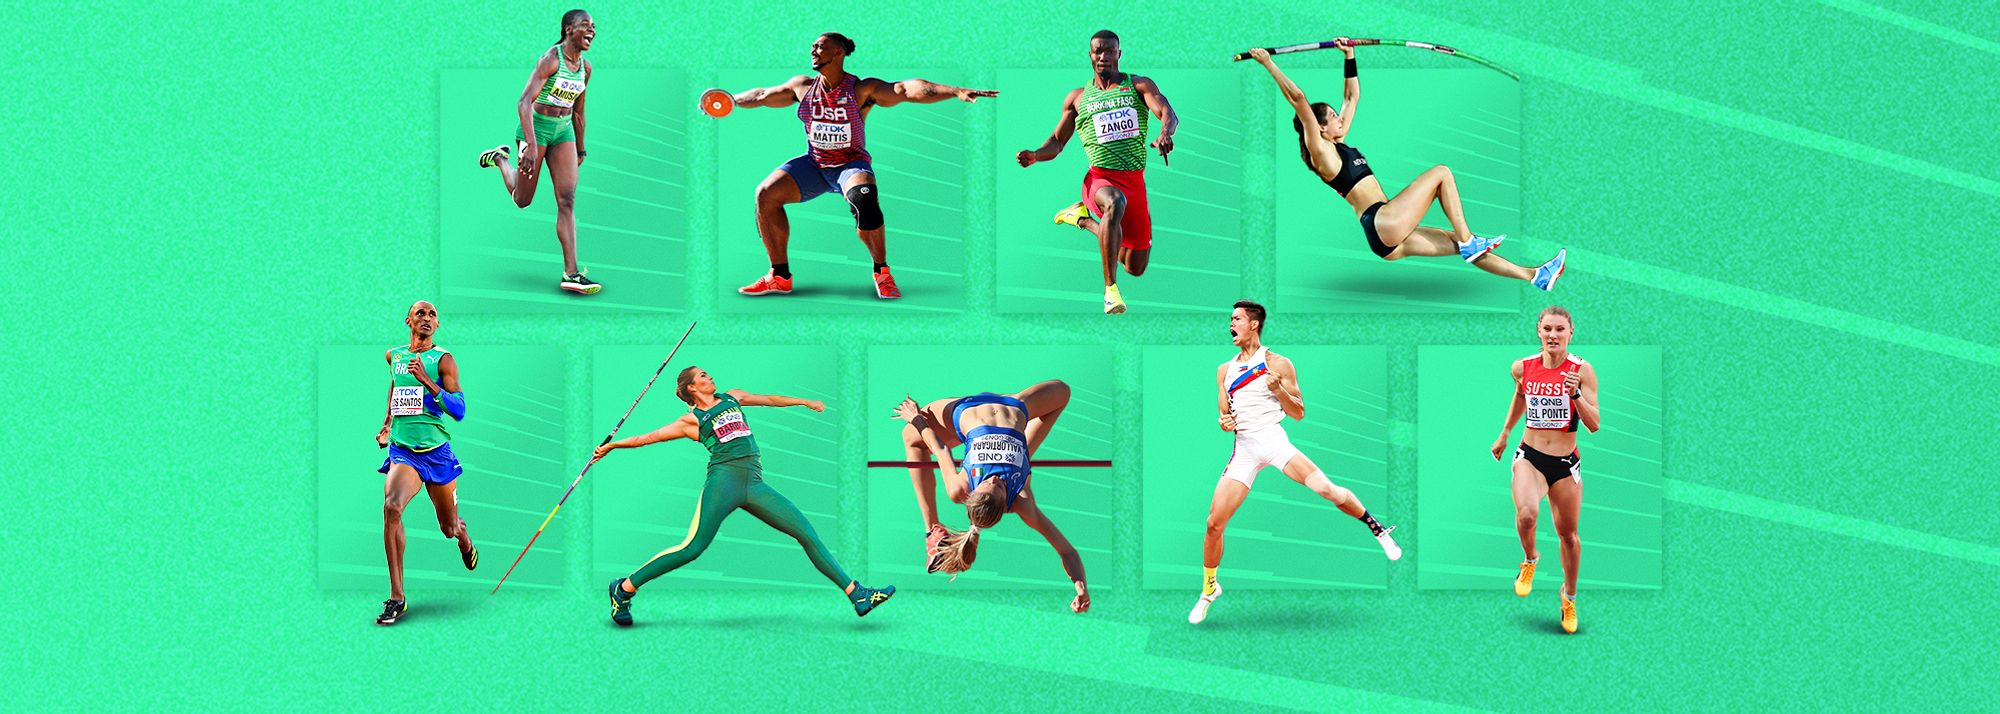 The new athlete group will support World Athletics in campaigning for sustainability within the sport and encourage other athletes to take a more active role in addressing environmental concerns